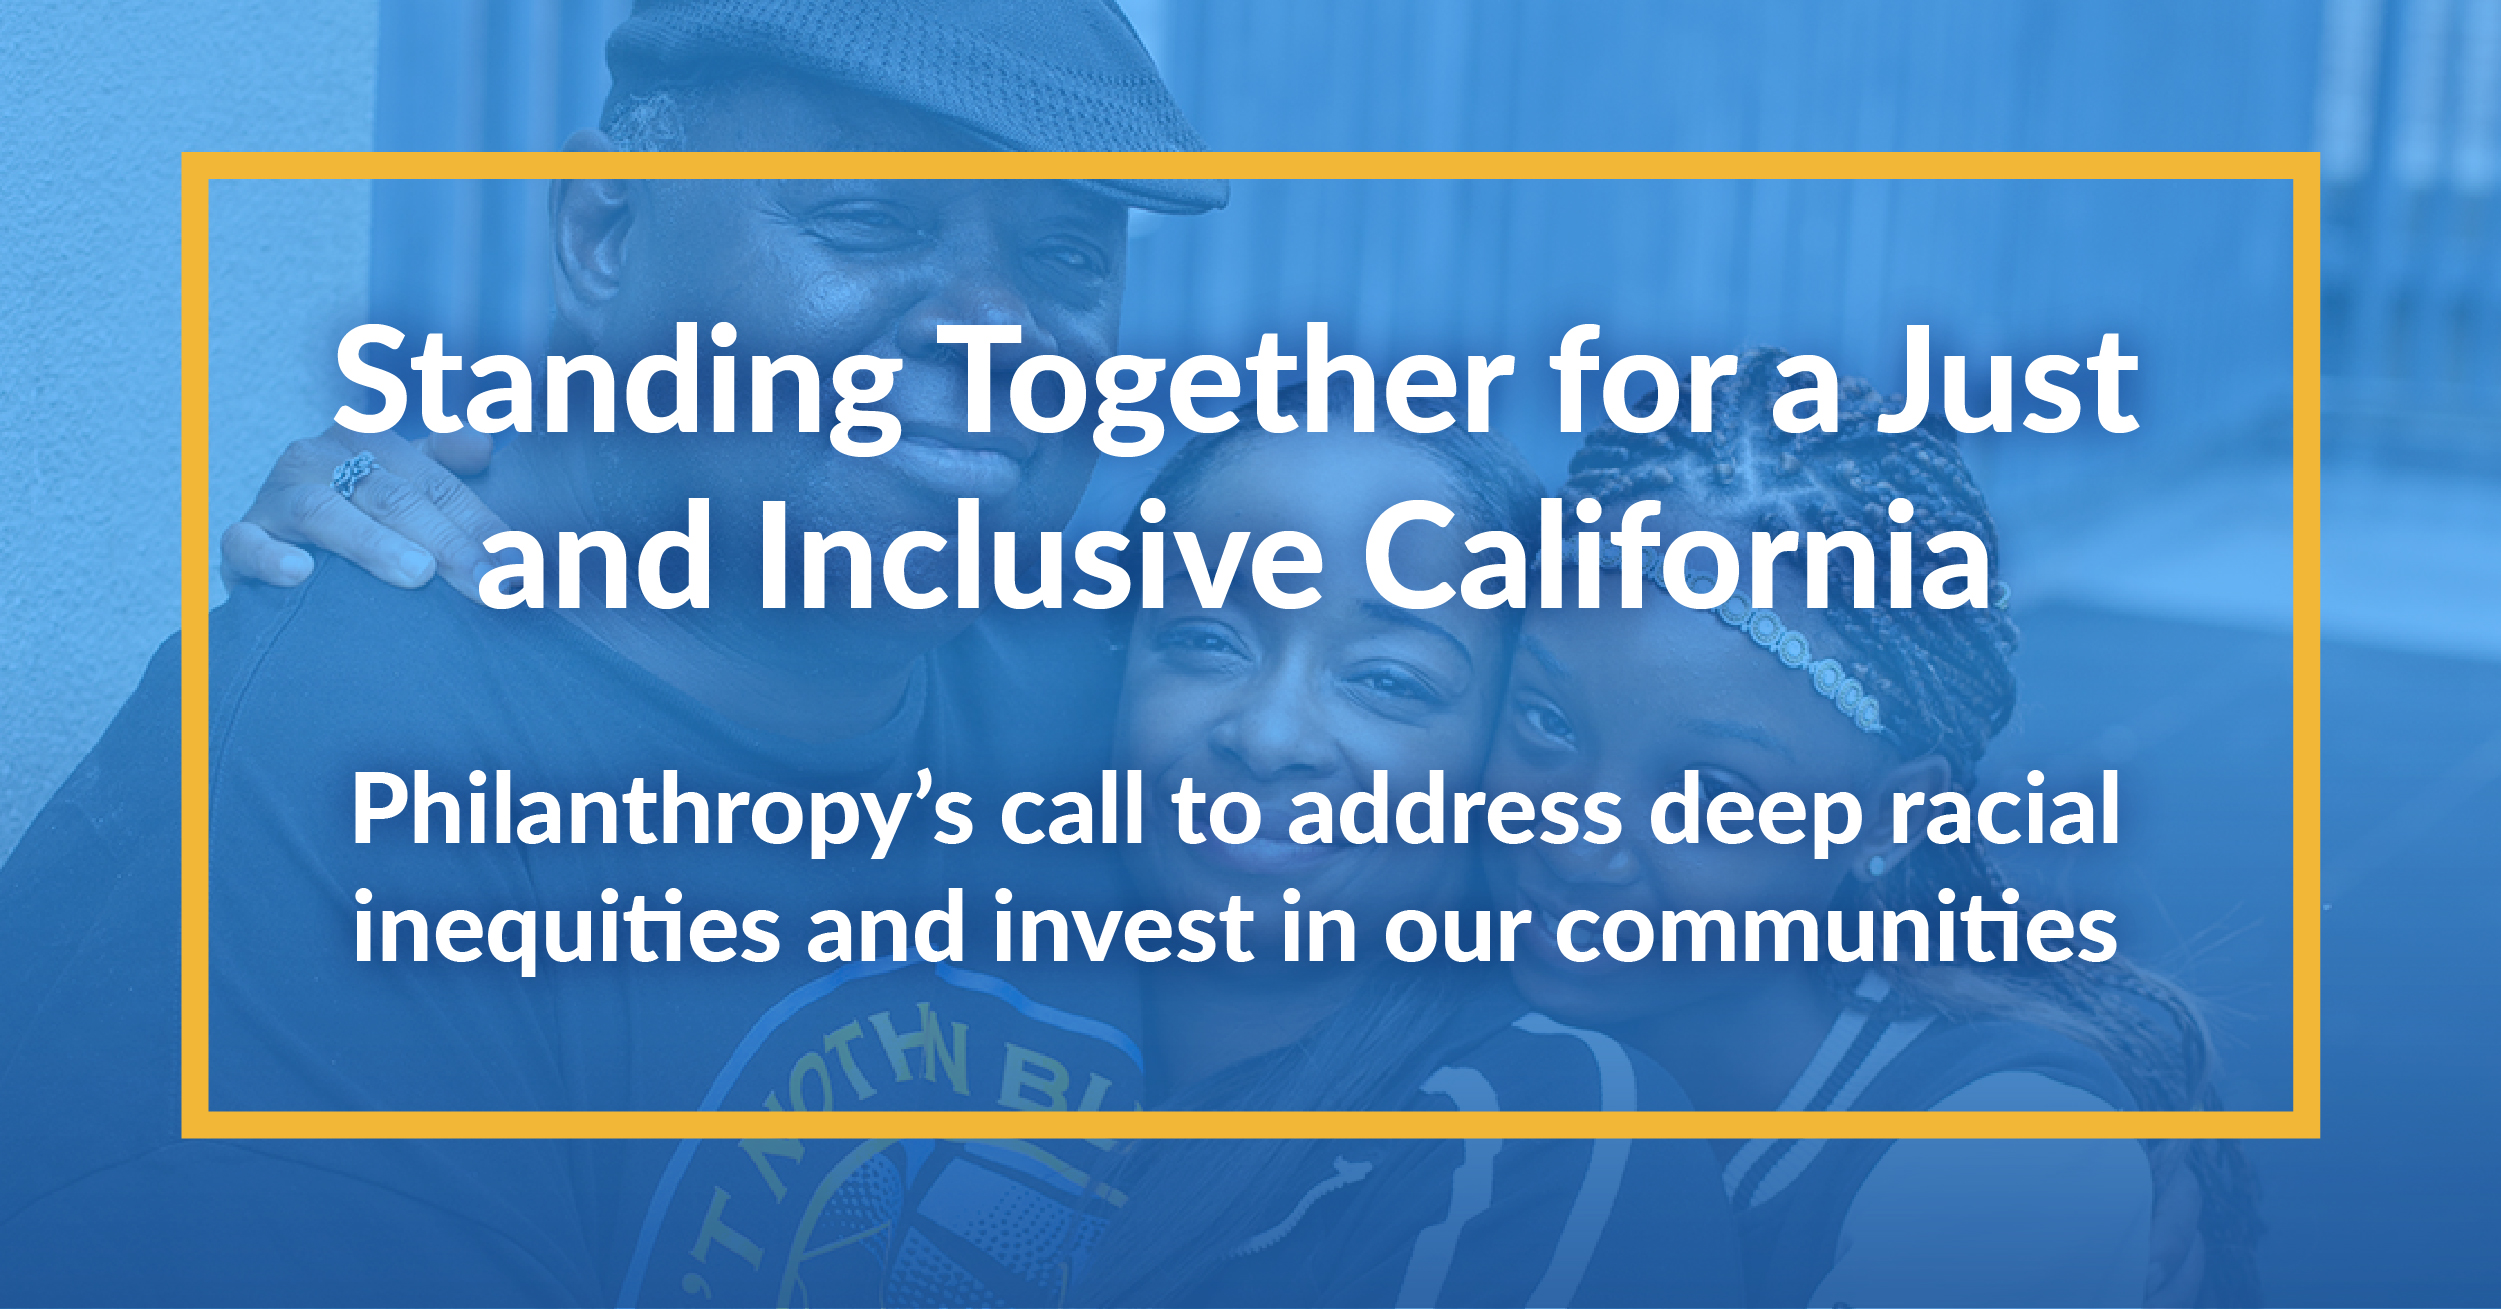 An Open Letter from California Philanthropic Organizations: Standing Together for a Just and Inclusive California